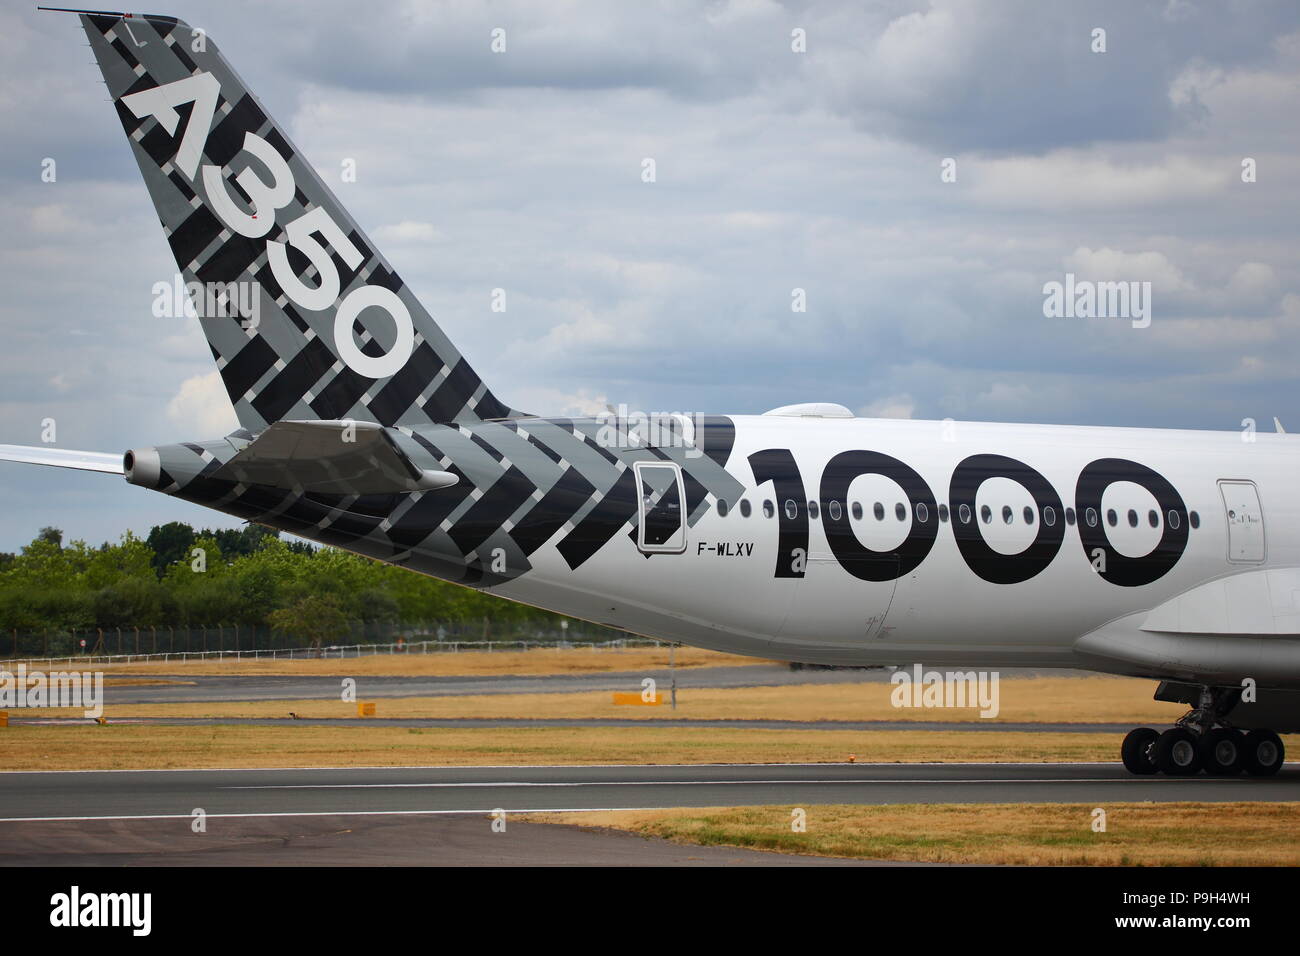 The new Airbus A350-1000 was presented to the public at the Farnborough International Airshow 2018 Stock Photo